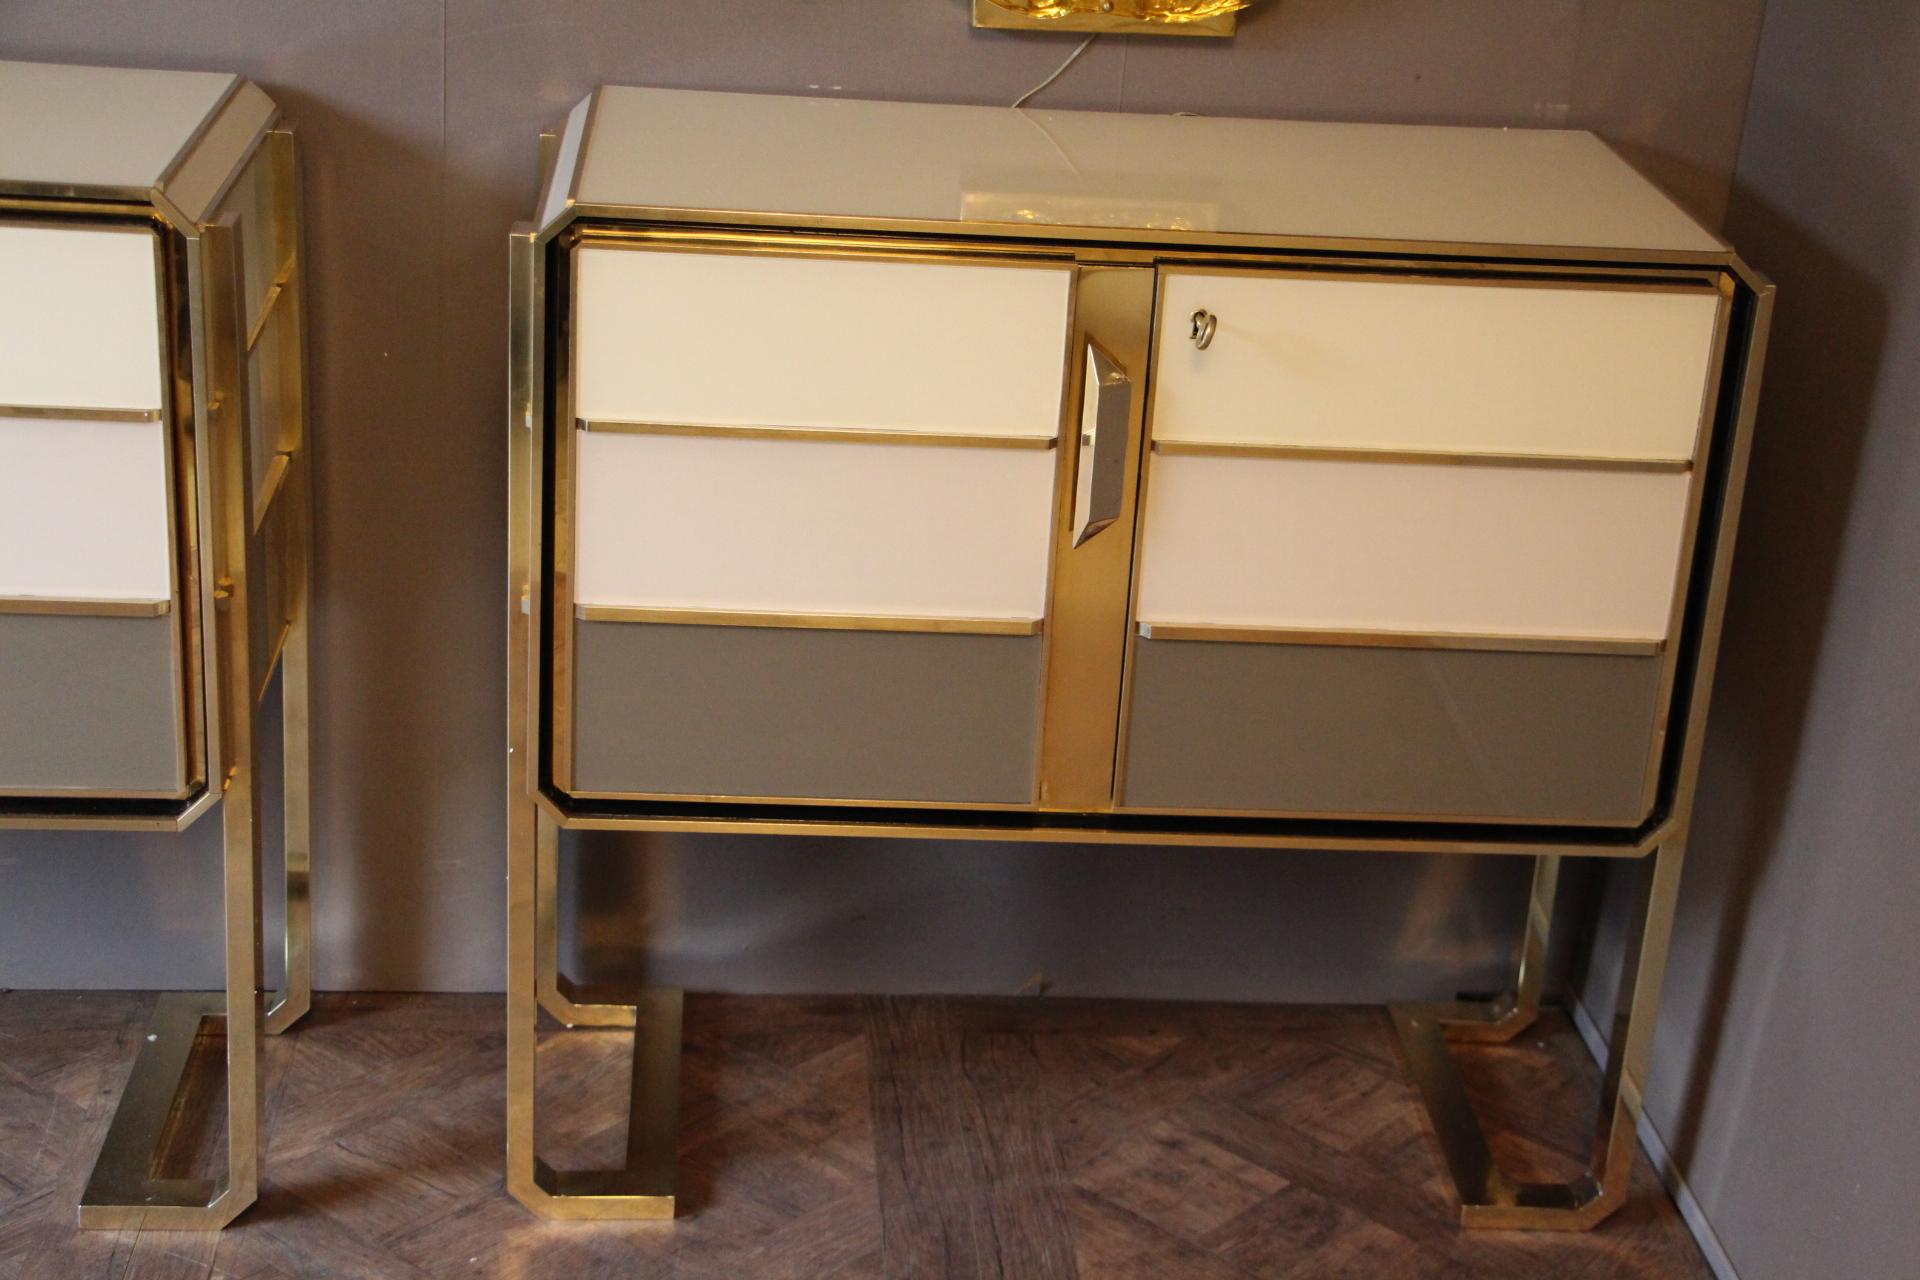 Superb pair of Italian fine design one of a kind cabinets in golden polished brass, ivory white, beige and grey color Murano glass featuring 2 doors. The top is covered in beige color Murano glass.
Solid wood structure.
These cabinets have been